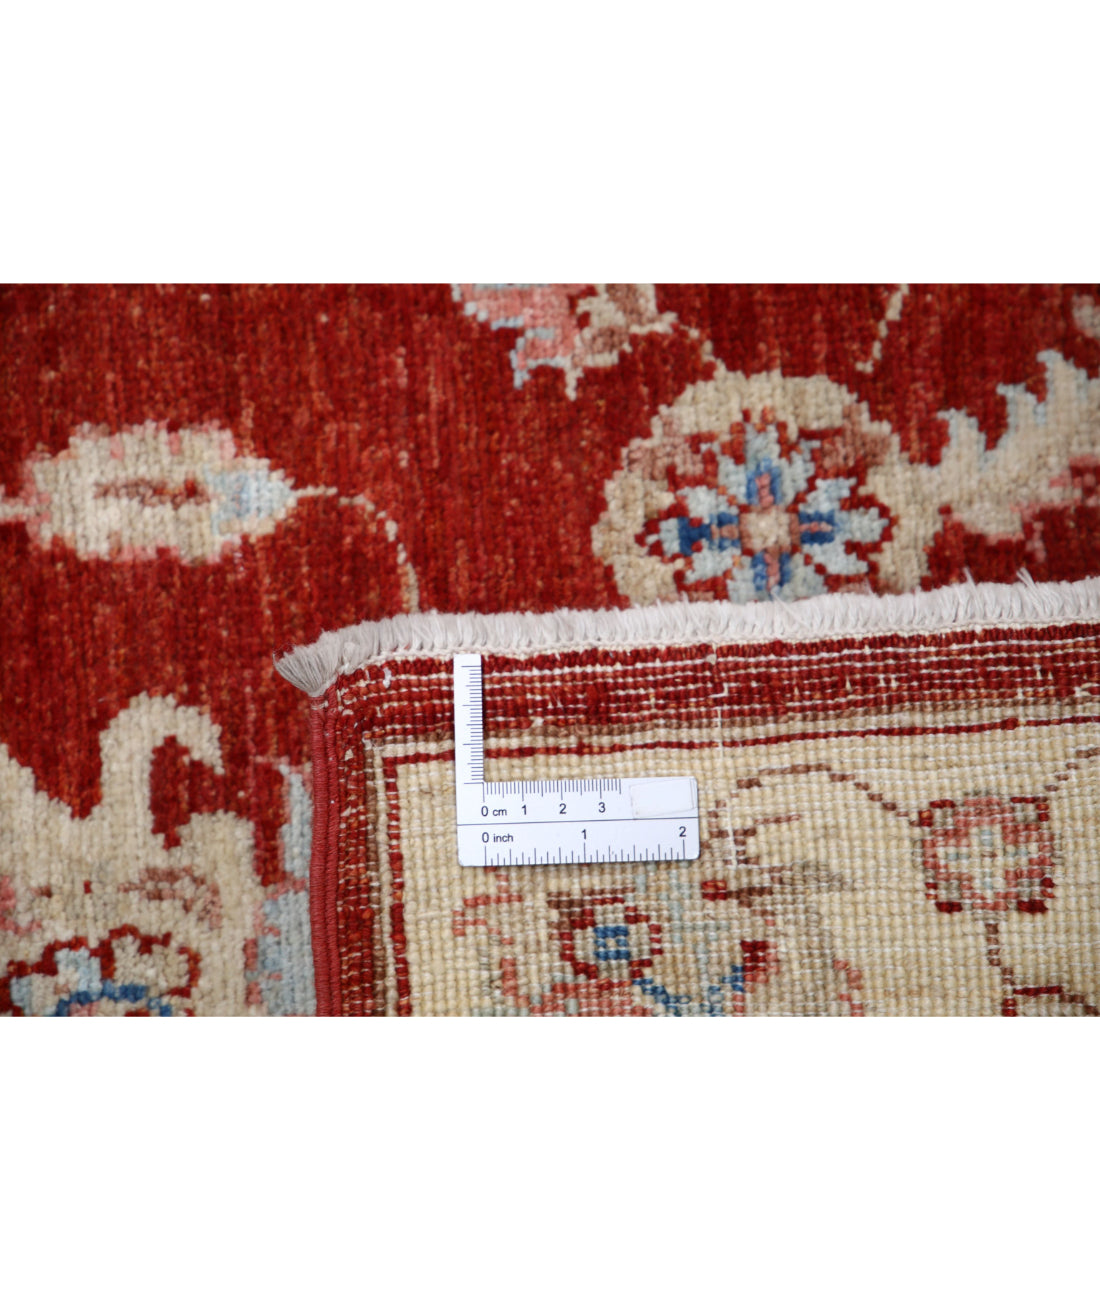 Ziegler 2'7'' X 8'5'' Hand-Knotted Wool Rug 2'7'' x 8'5'' (78 X 253) / Red / Ivory